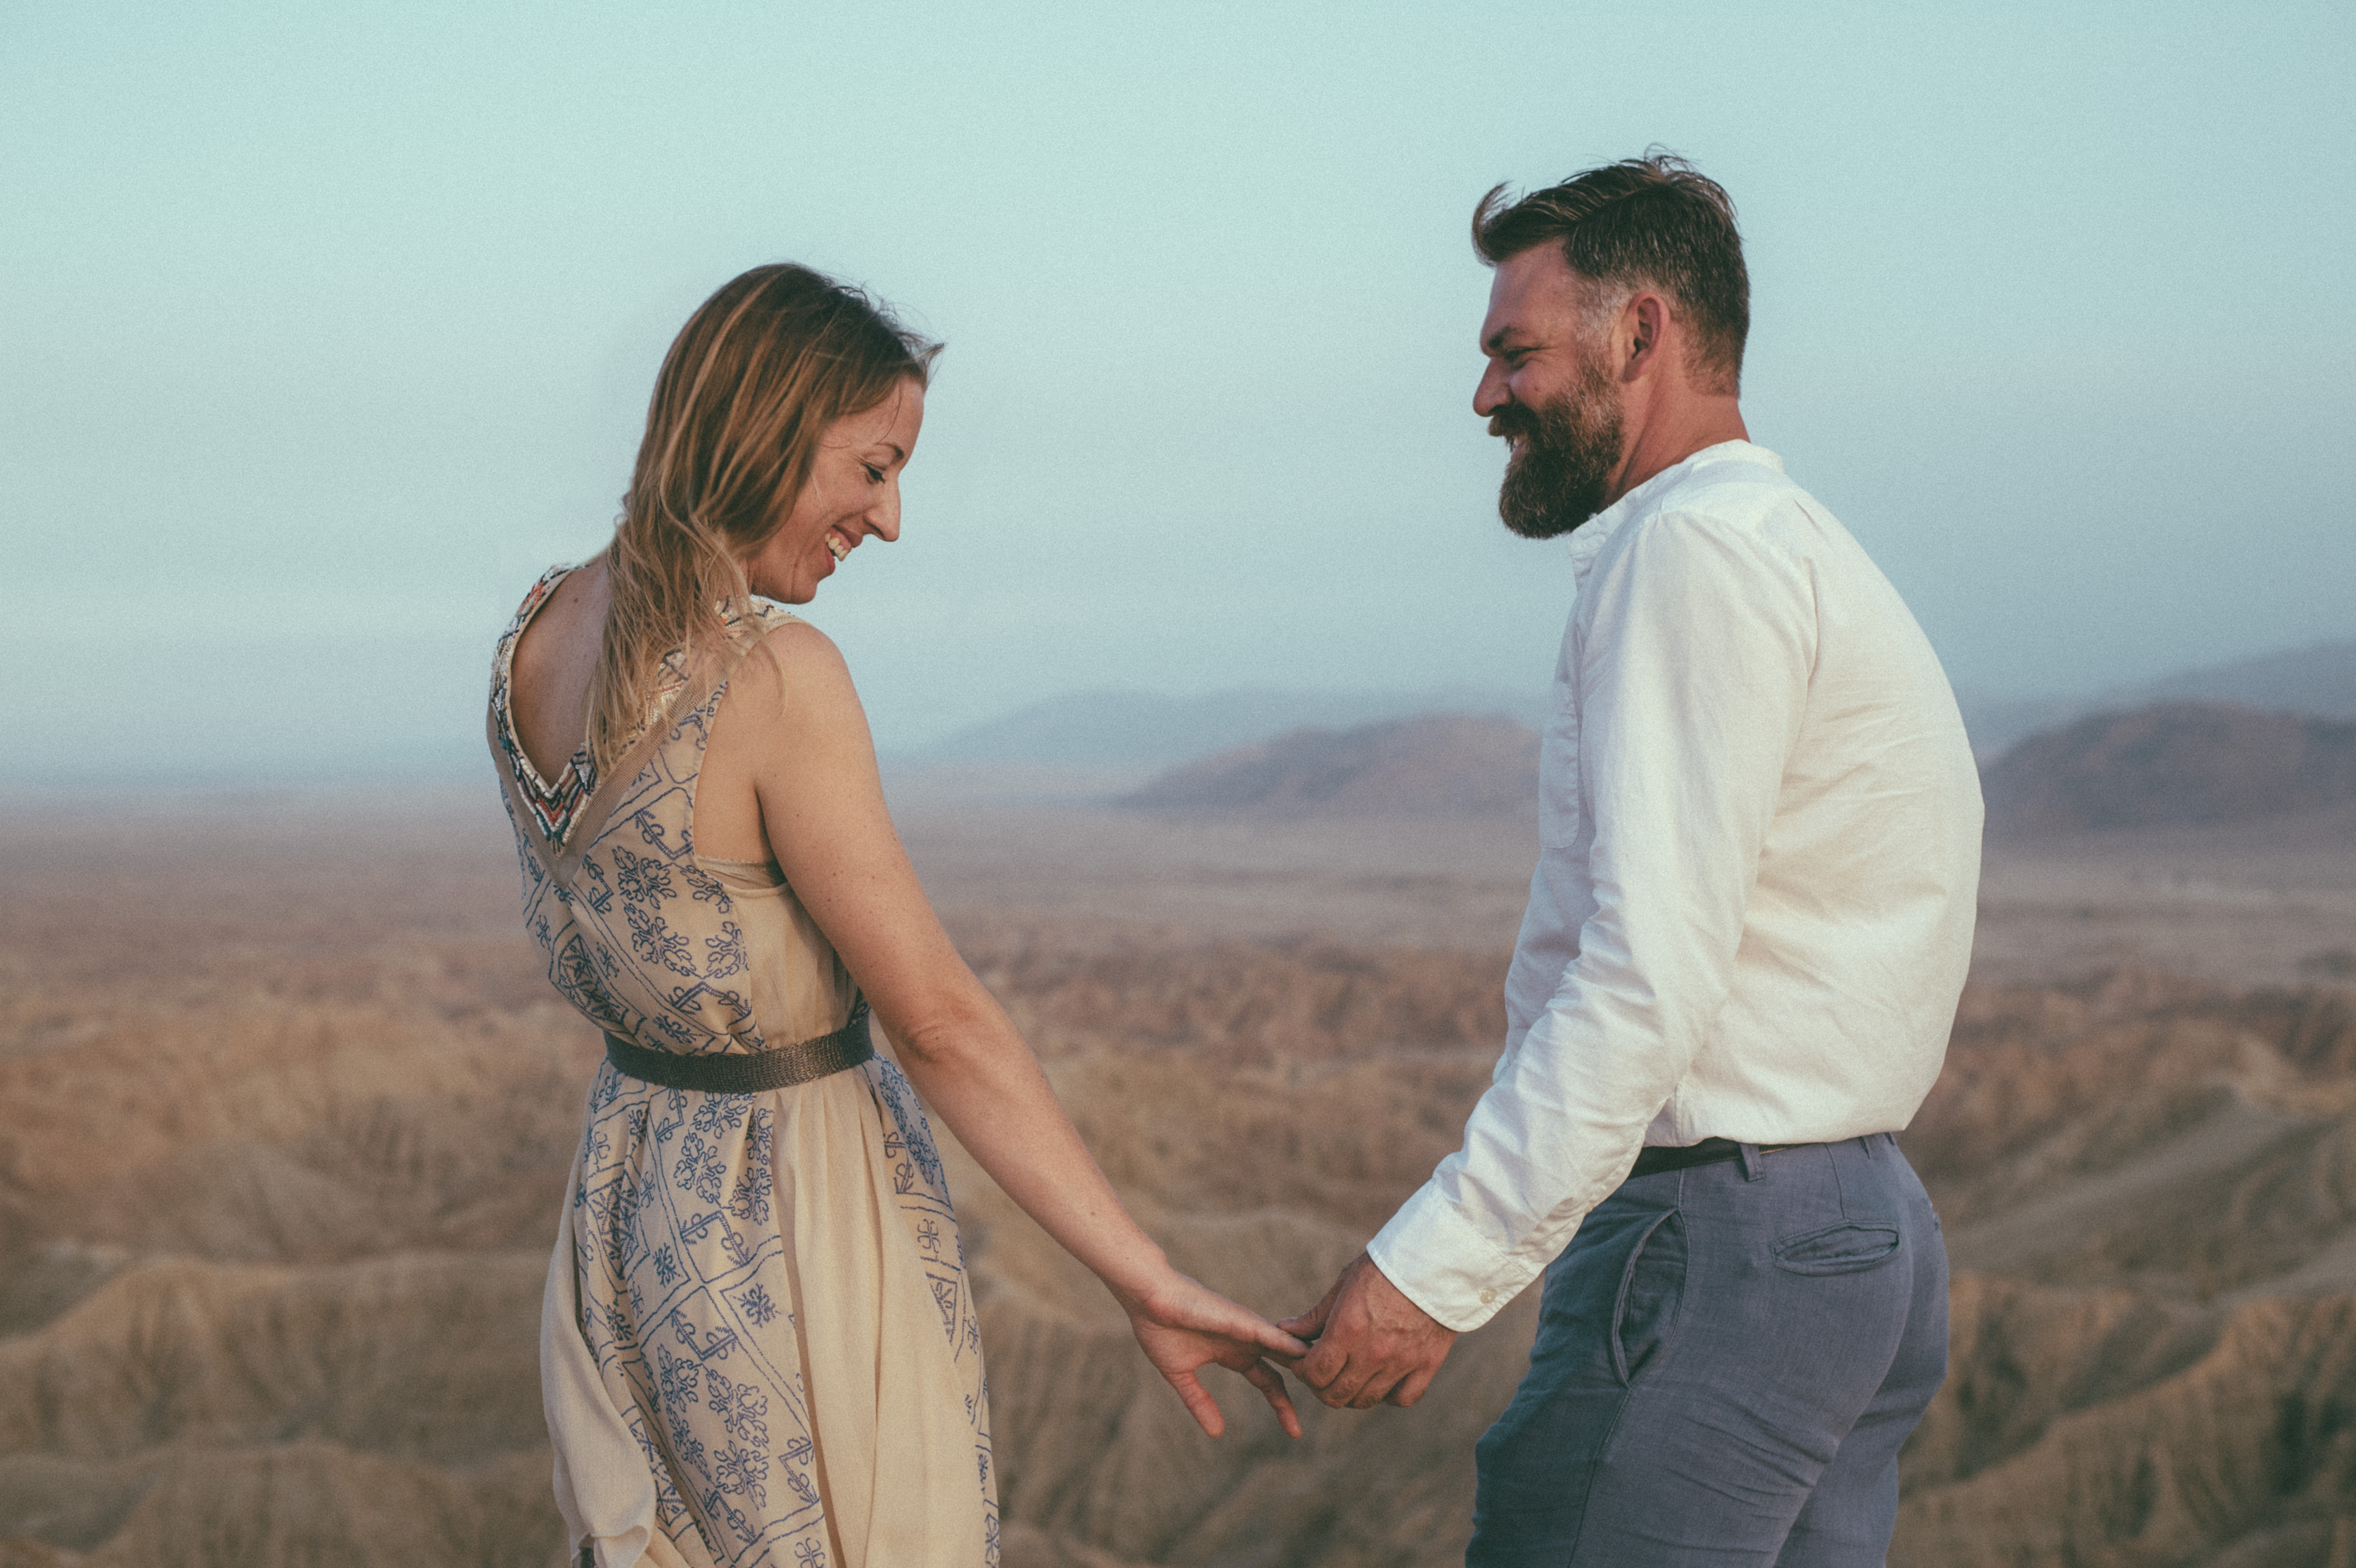 Photography from Karin & Luke's shoot at Font's Point in Borrego Springs